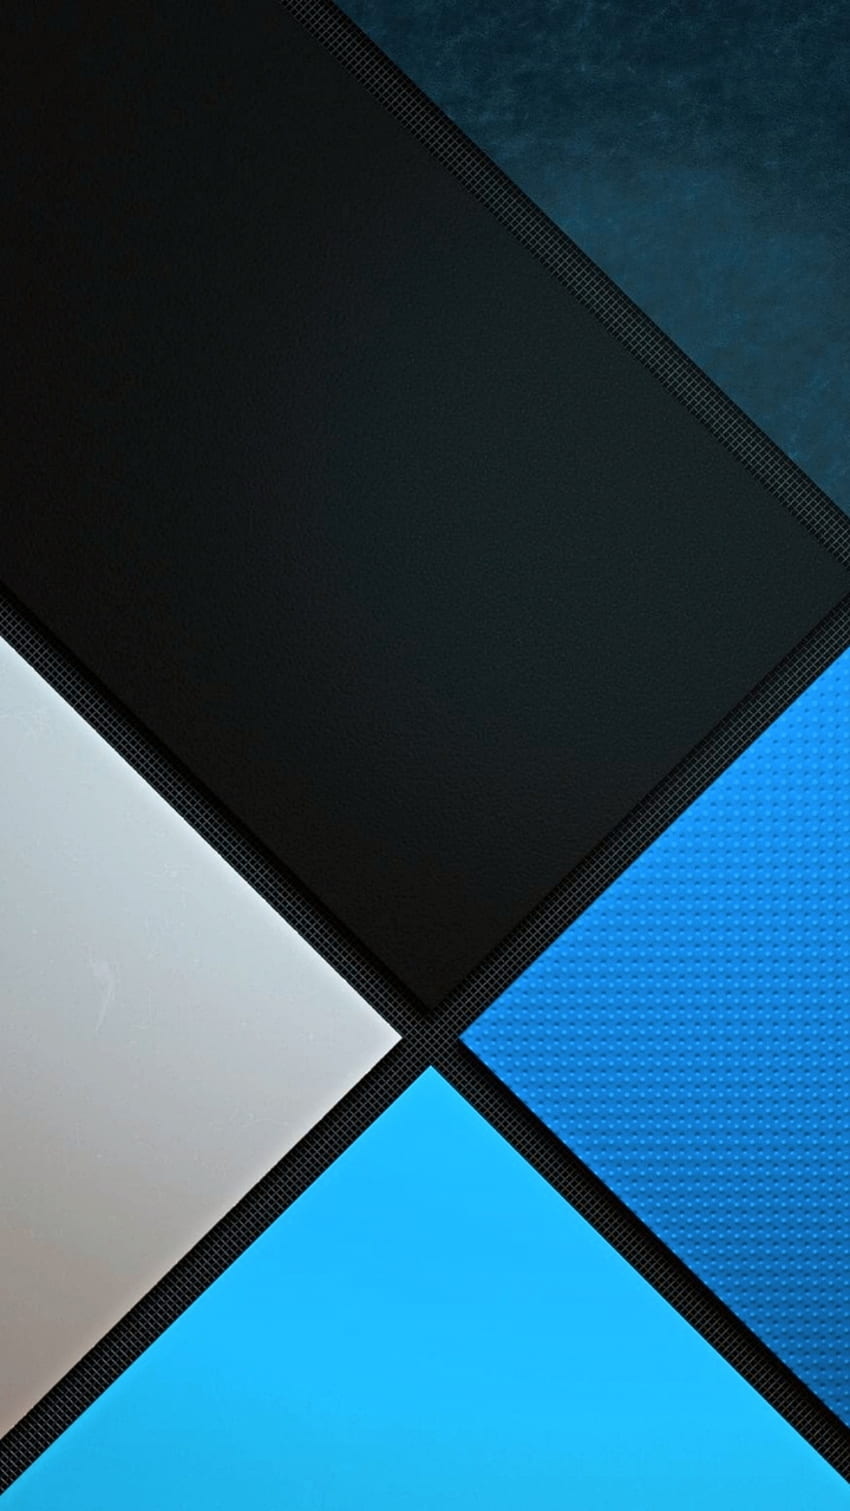 rsedfdsf, electric blue, new, texture, android, black, pattern, abstract, iphone, plus, samsung, gray, material, design, geometric, galaxy, , lines HD phone wallpaper